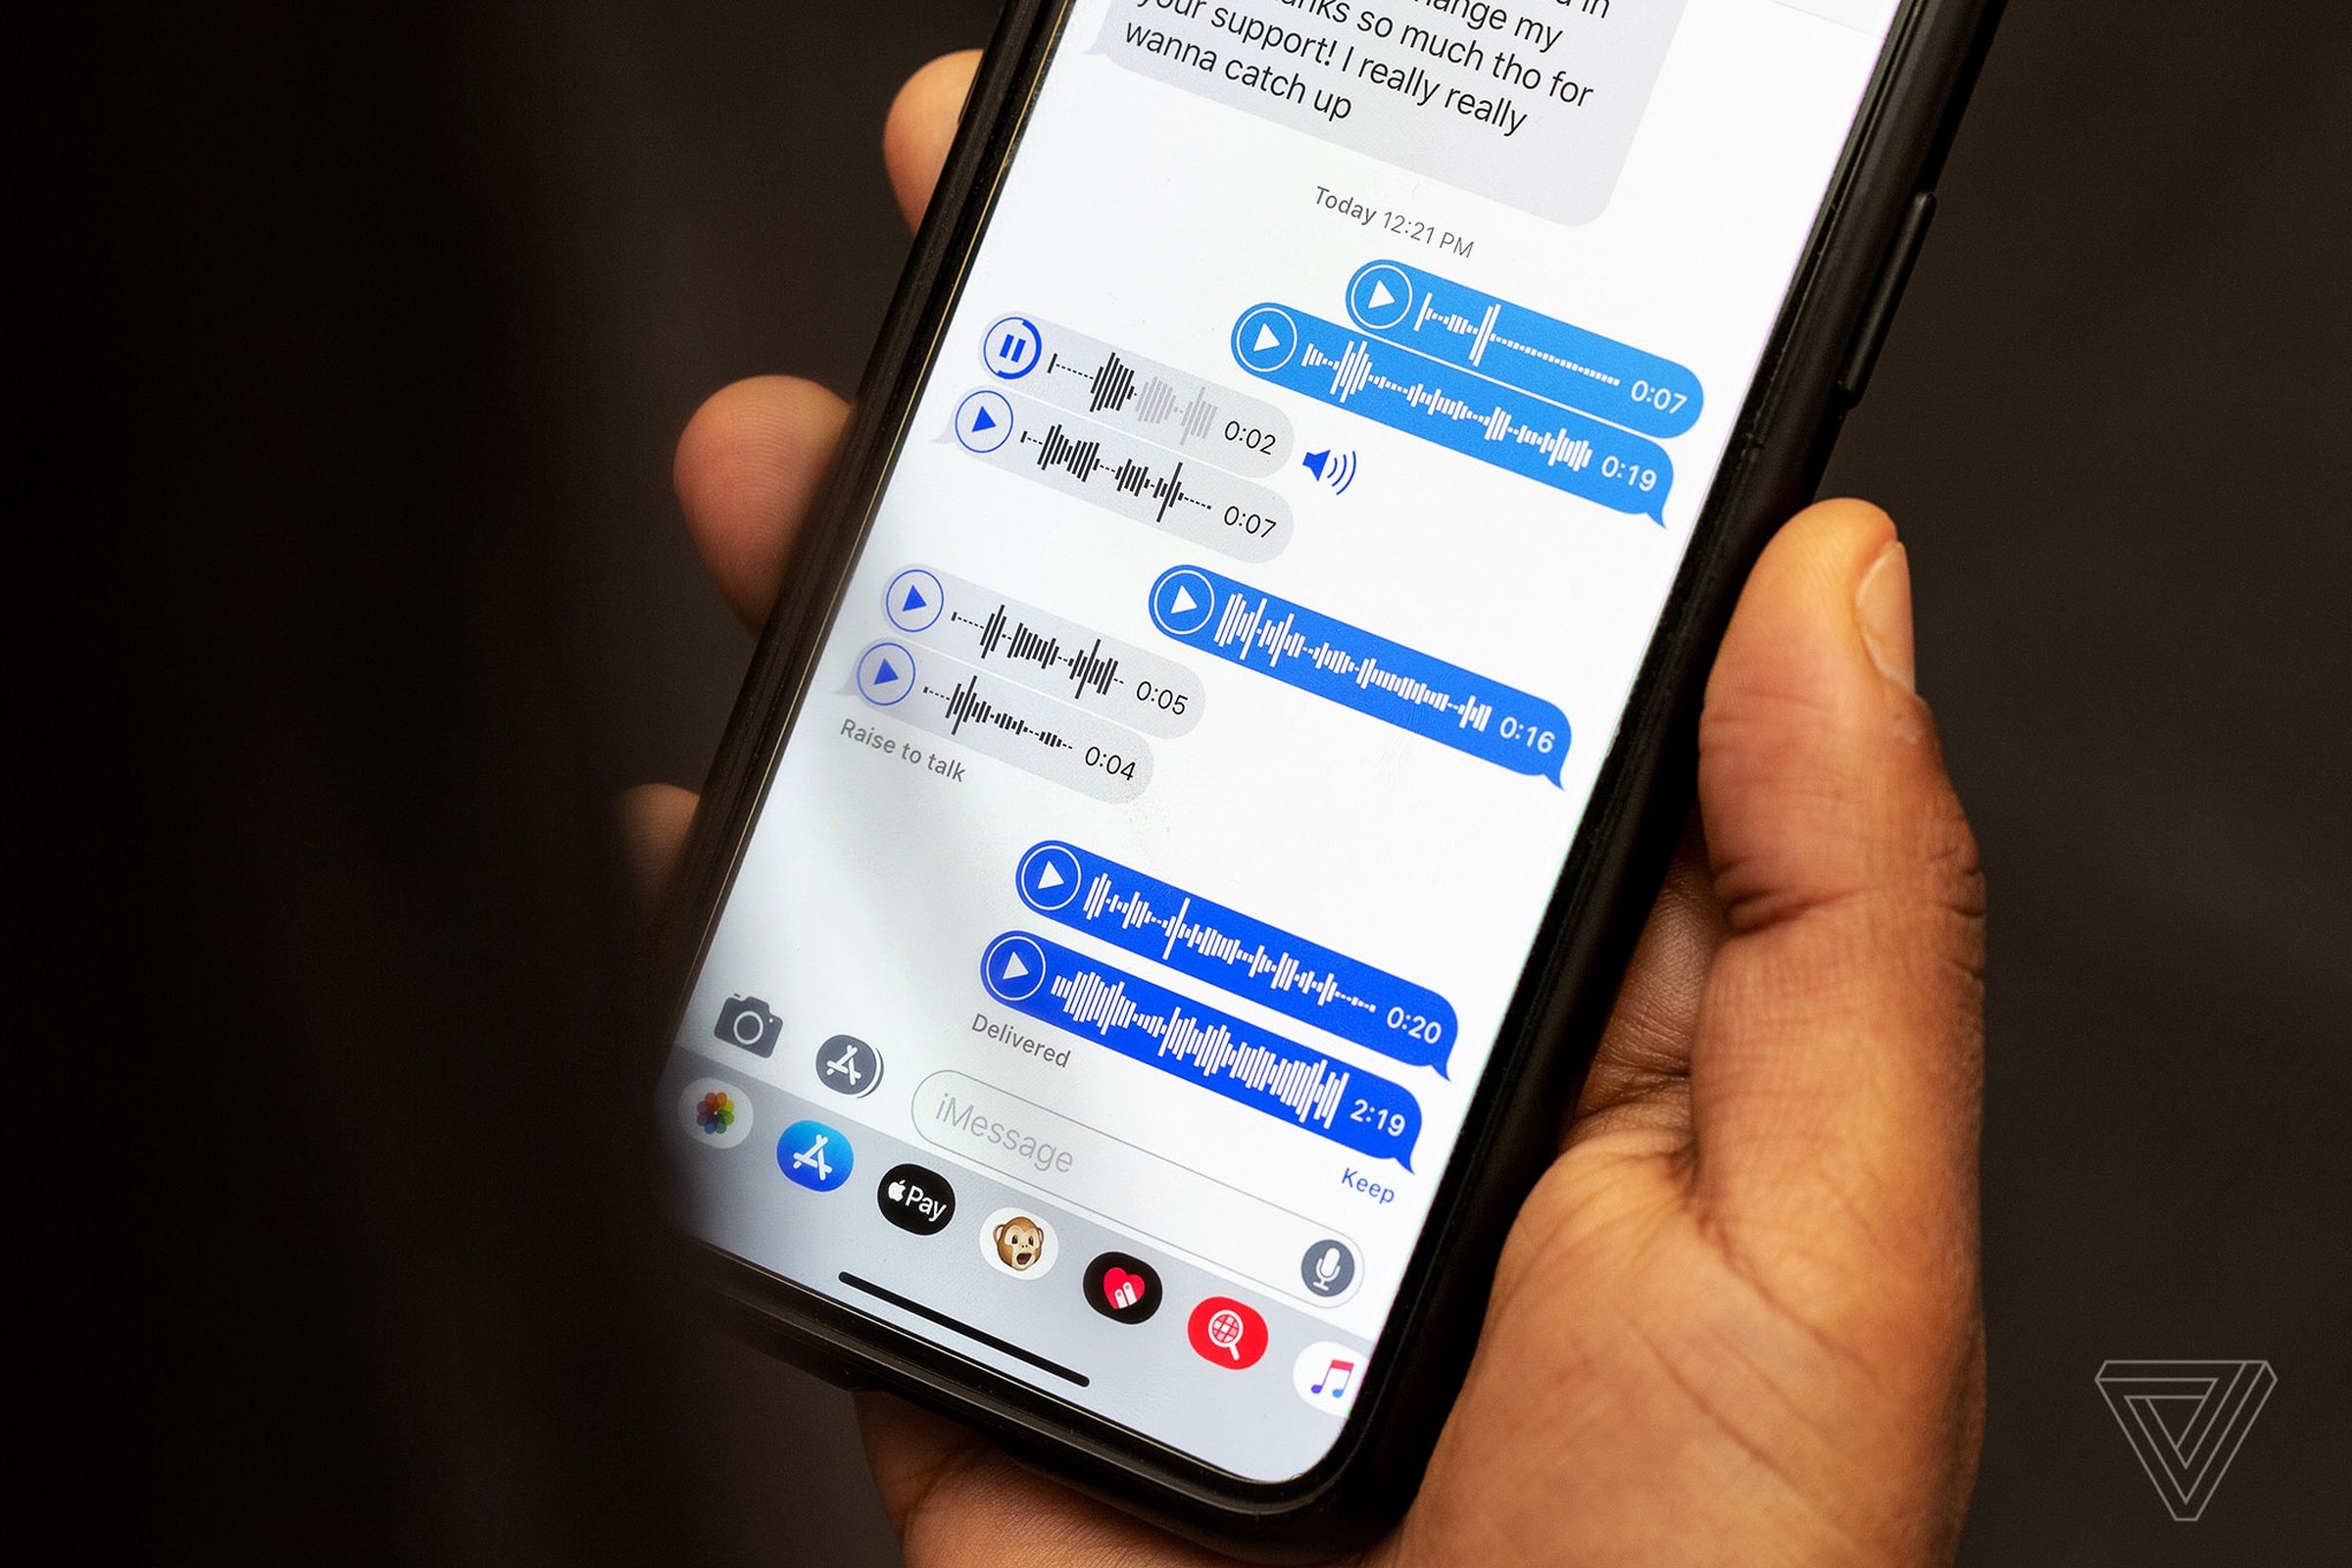 A photo showing someone use iMessage to record a voice message.